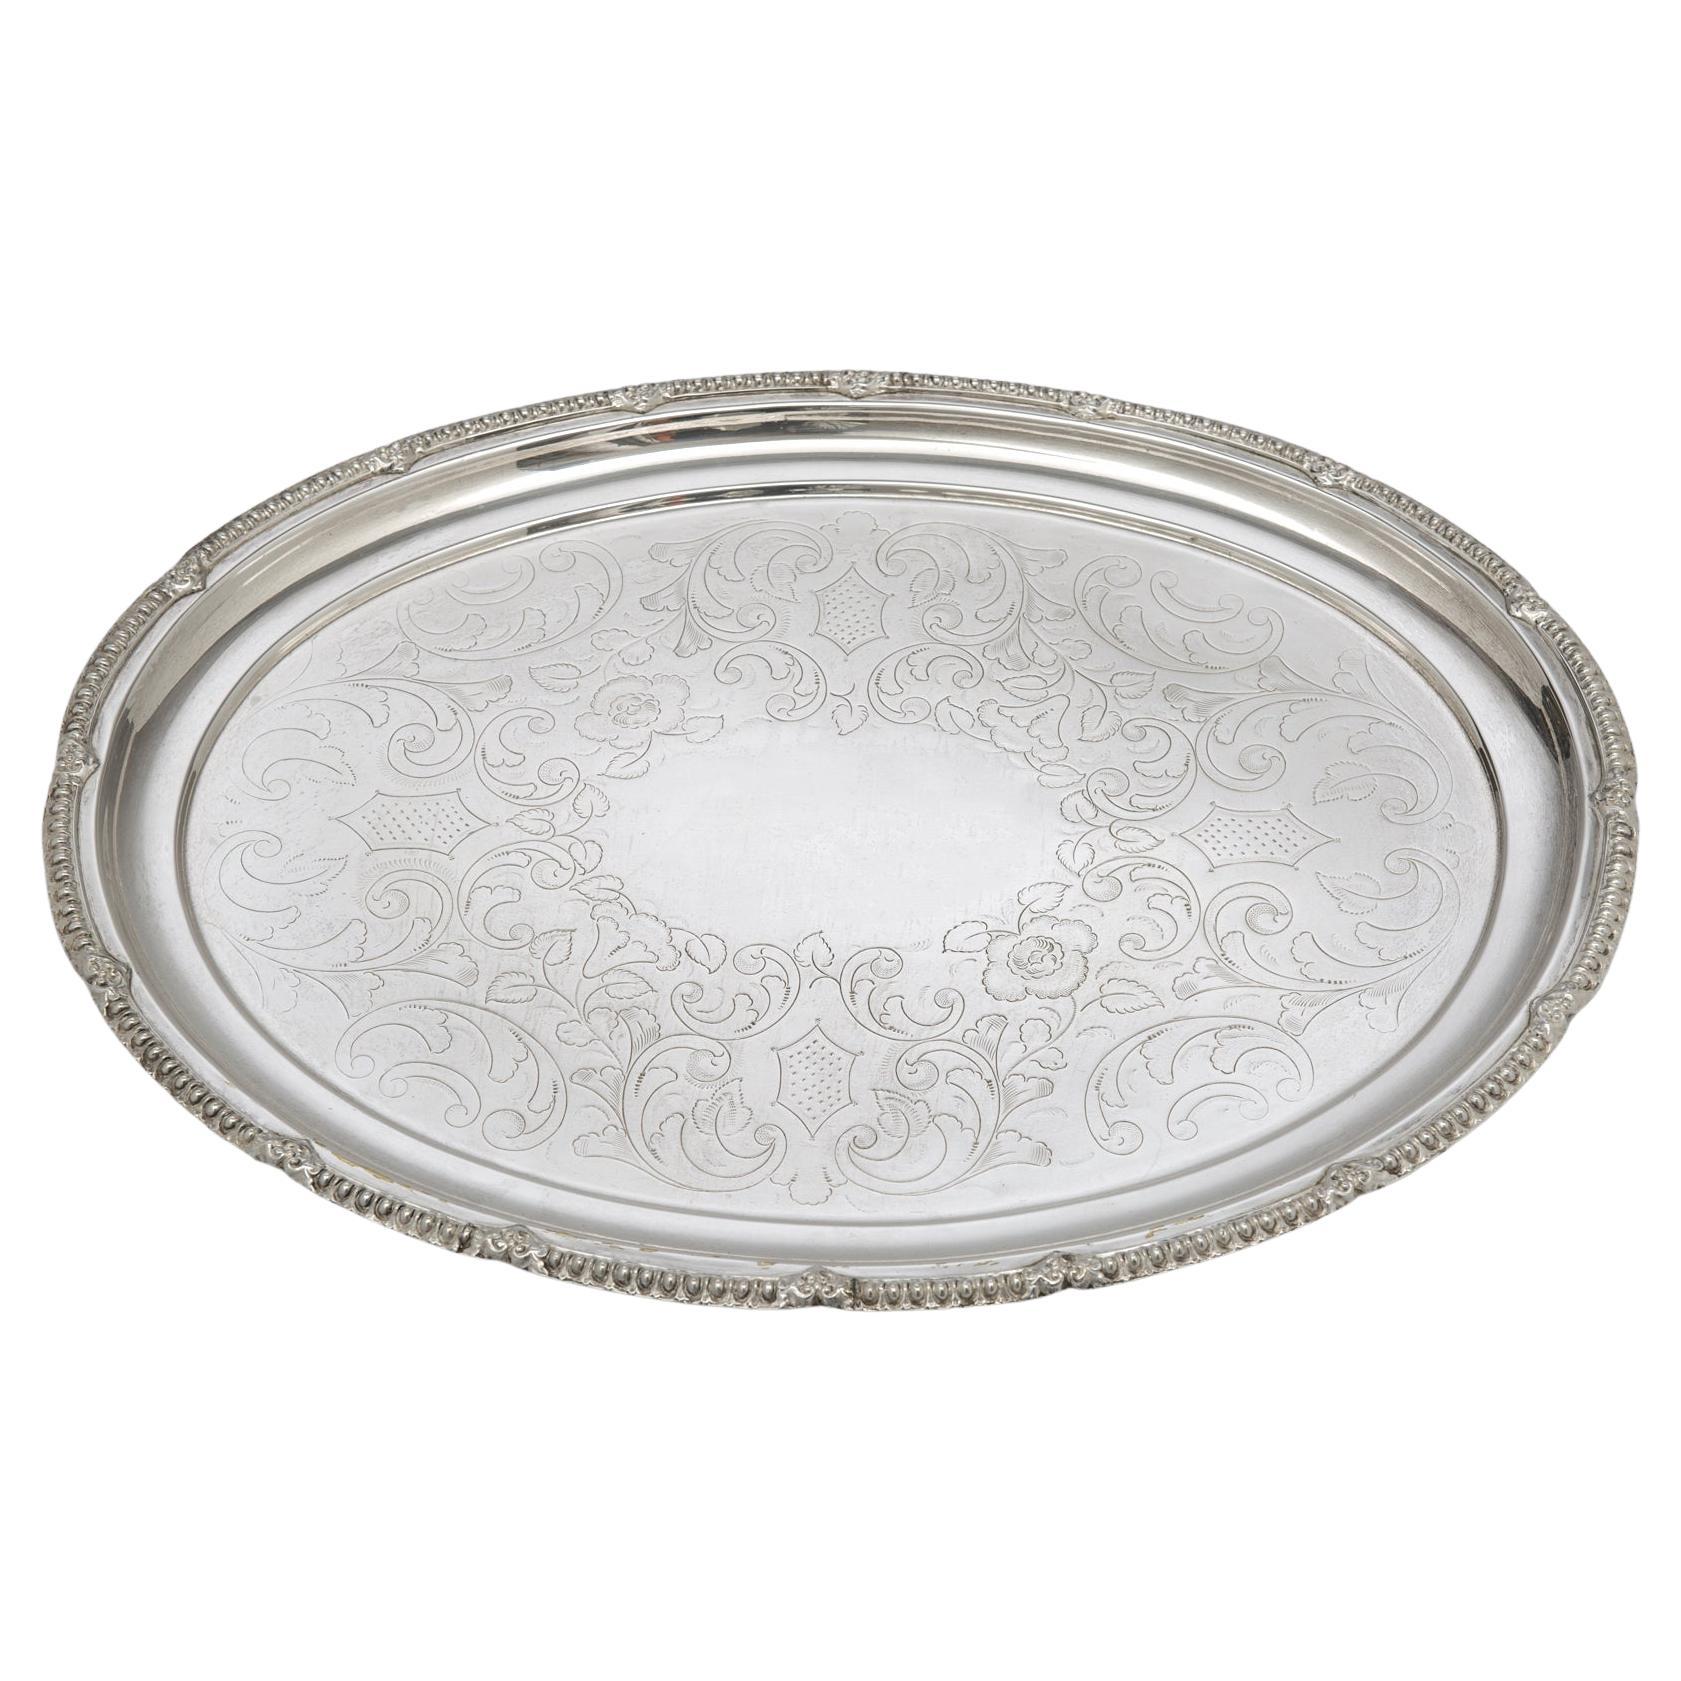 Oval Engraved Silver Plated Belgian Tray For Sale